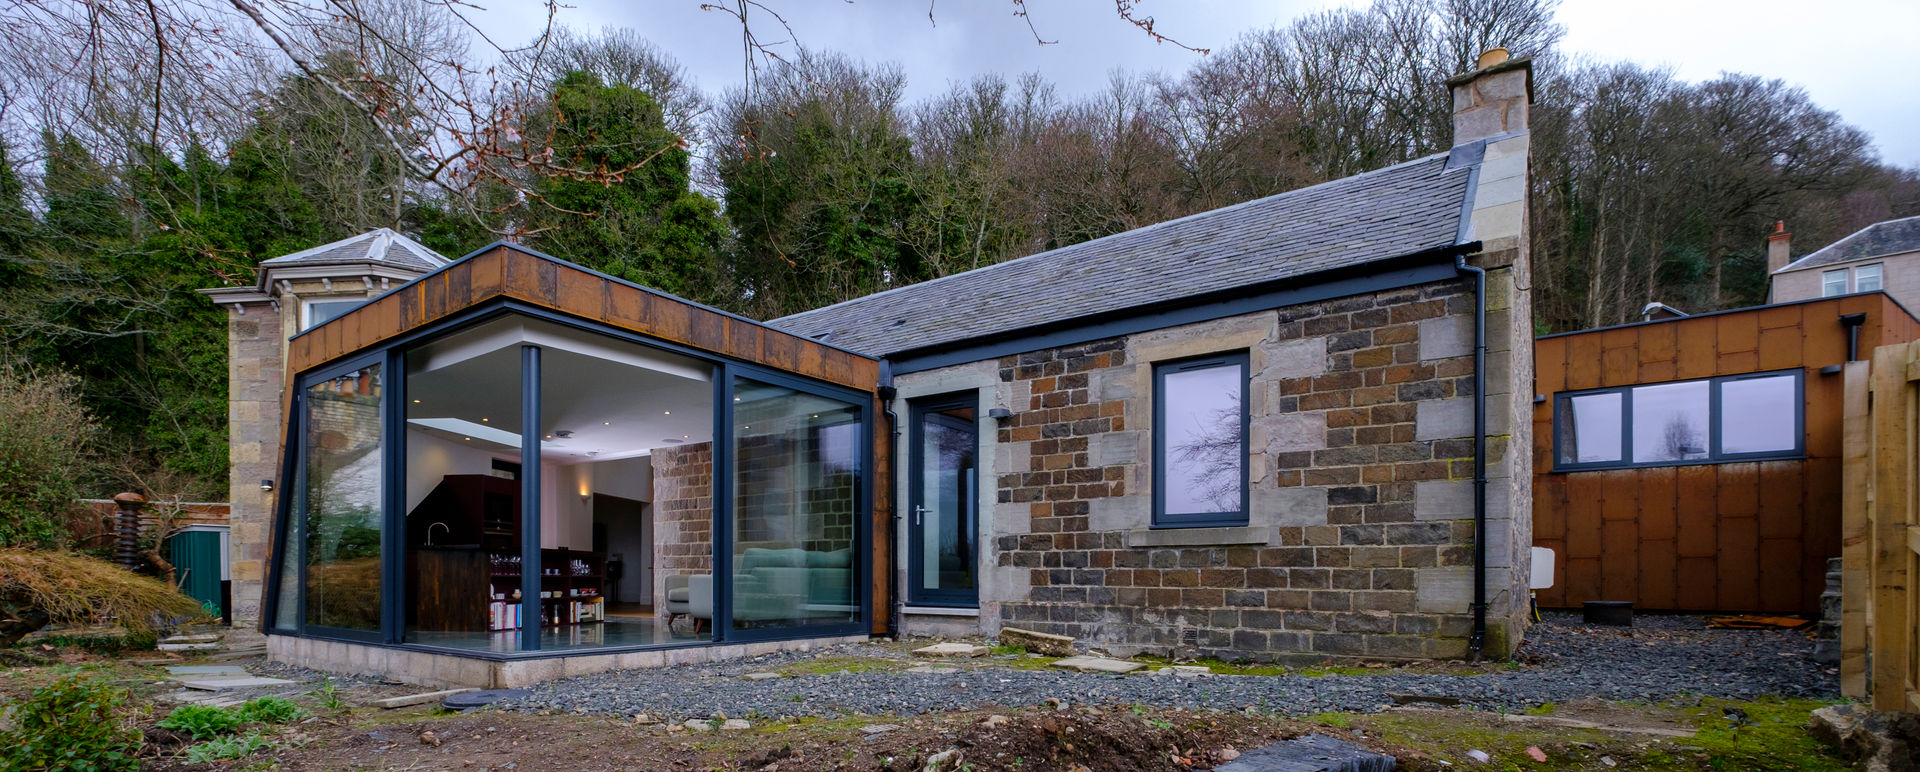 The rear extension to Woodend Cottage is clad in Corten steel and features large glass sliding doors Woodside Parker Kirk Architects Дома в стиле модерн Железо / Сталь Corten steel,cladding,cottage,extension,flat roof,alu-clad windows,daylight,garden